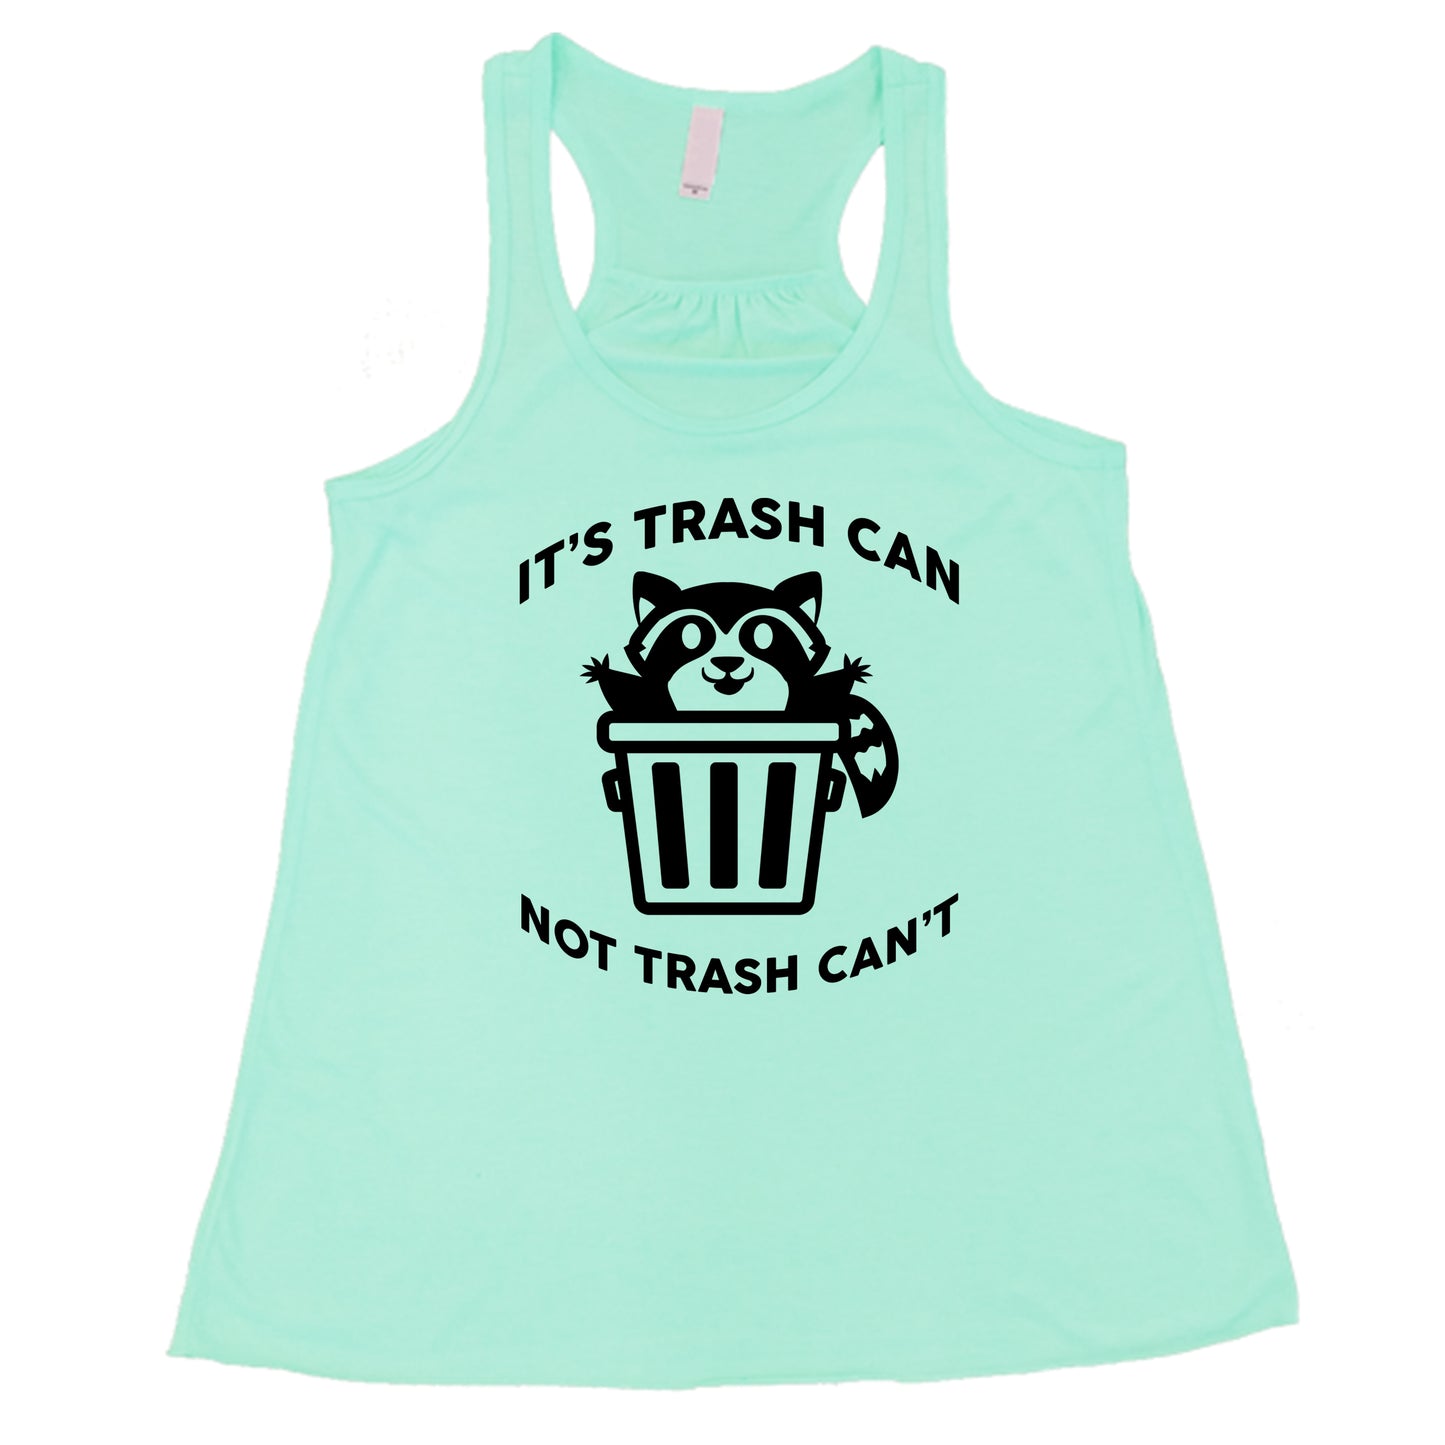 It's Trash Can Not Trash Can't Shirt